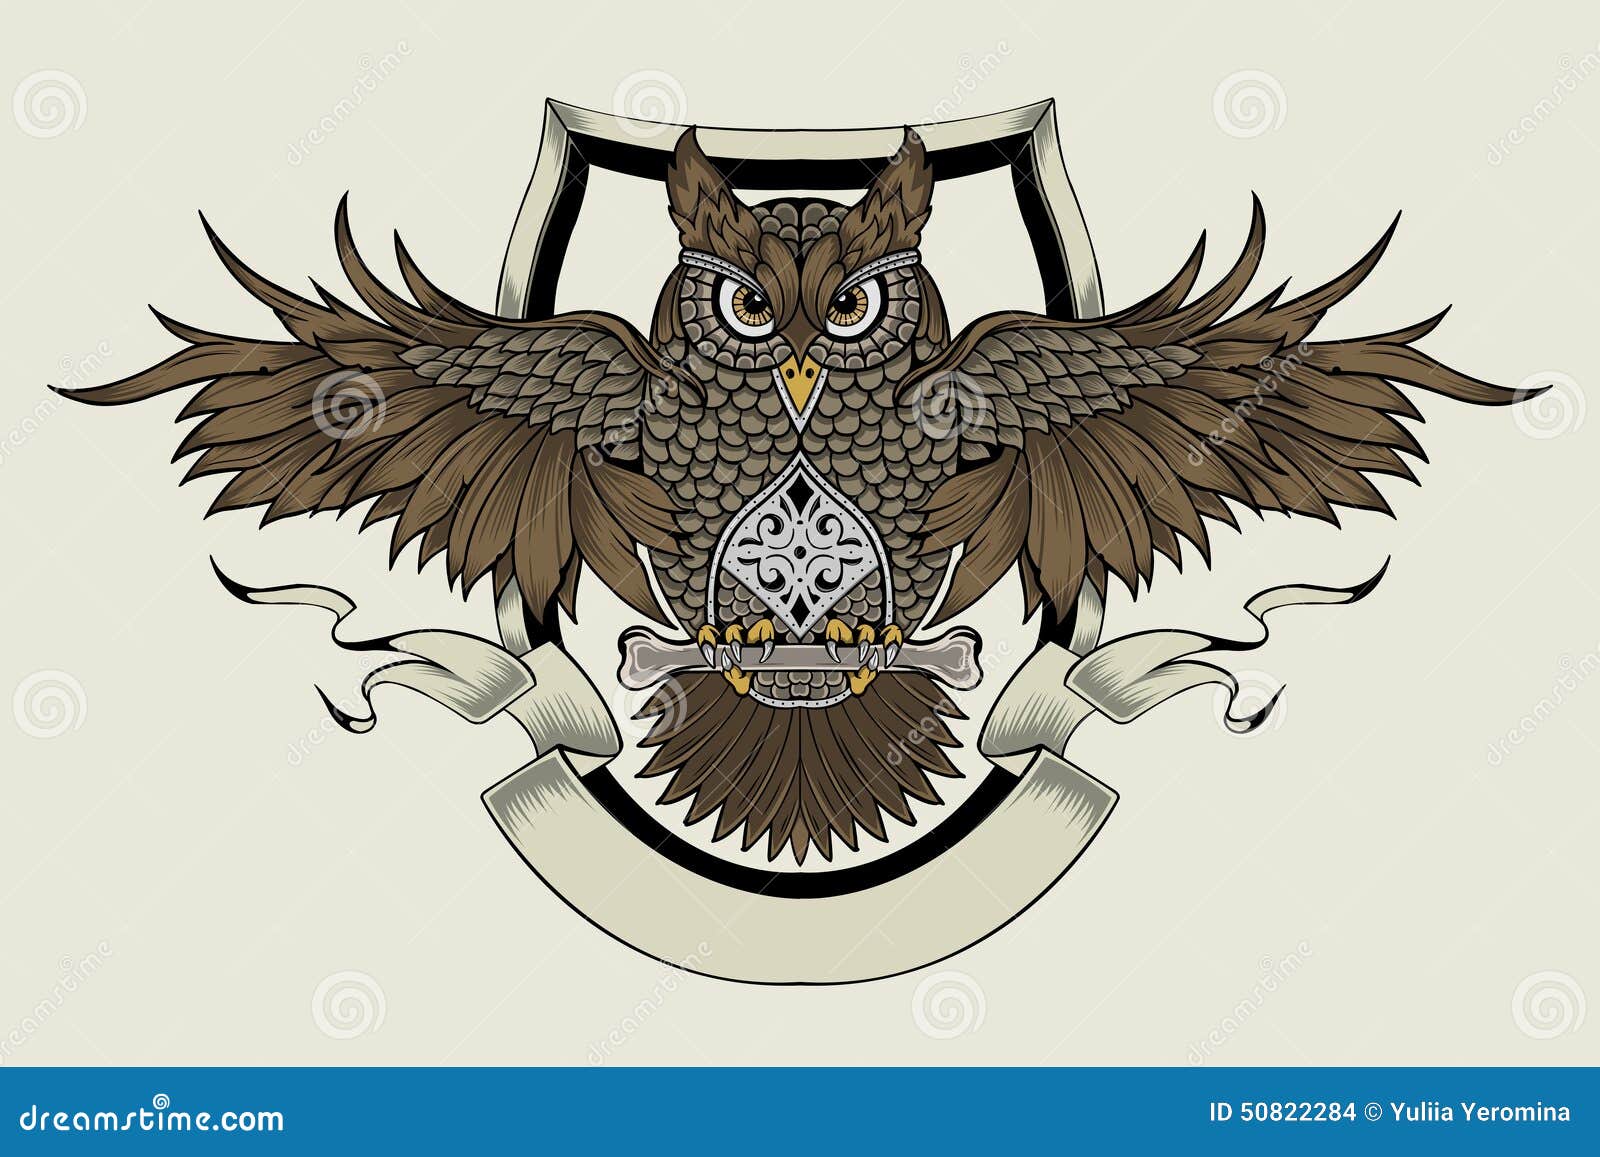 Illustration Of An Owl Stock Vector - Image: 50822284